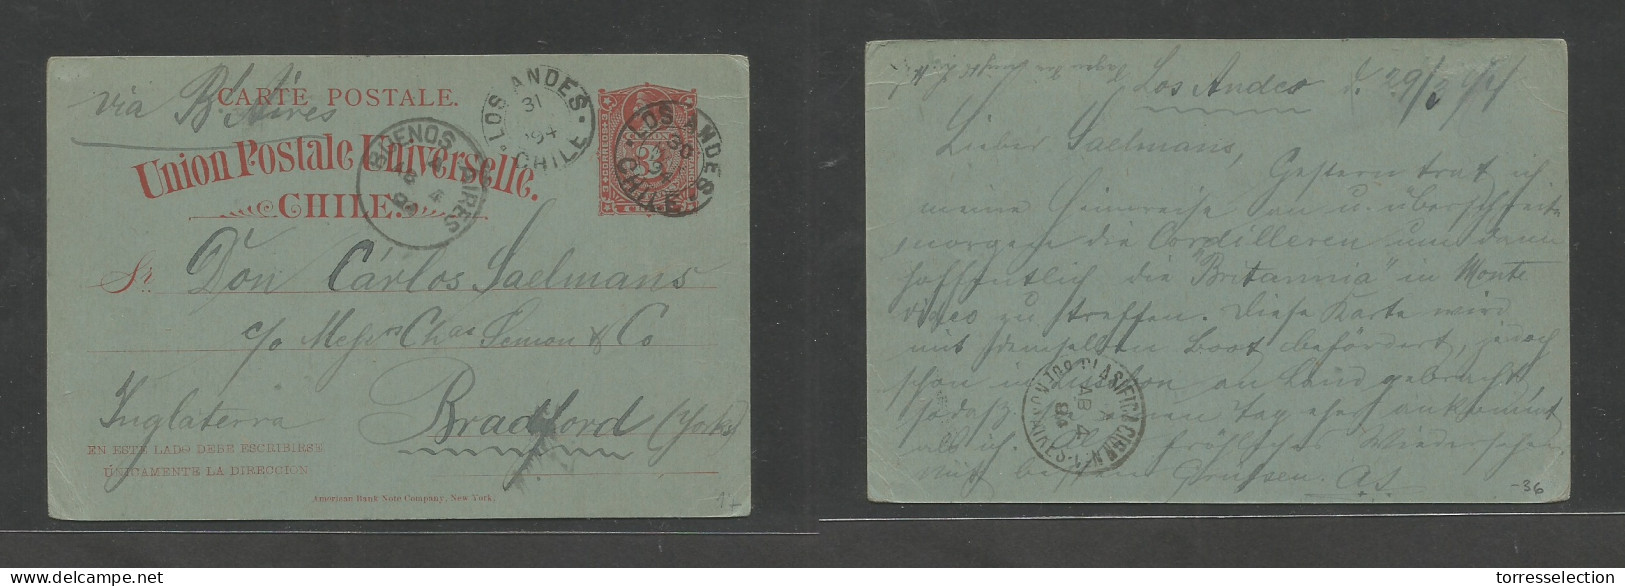 CHILE - Stationery. 1894 (29-31 March) Los Andes - Bradford, Yorkshire, UK. Via Buenos Aires. 3c Red / Greenish Stat Car - Cile